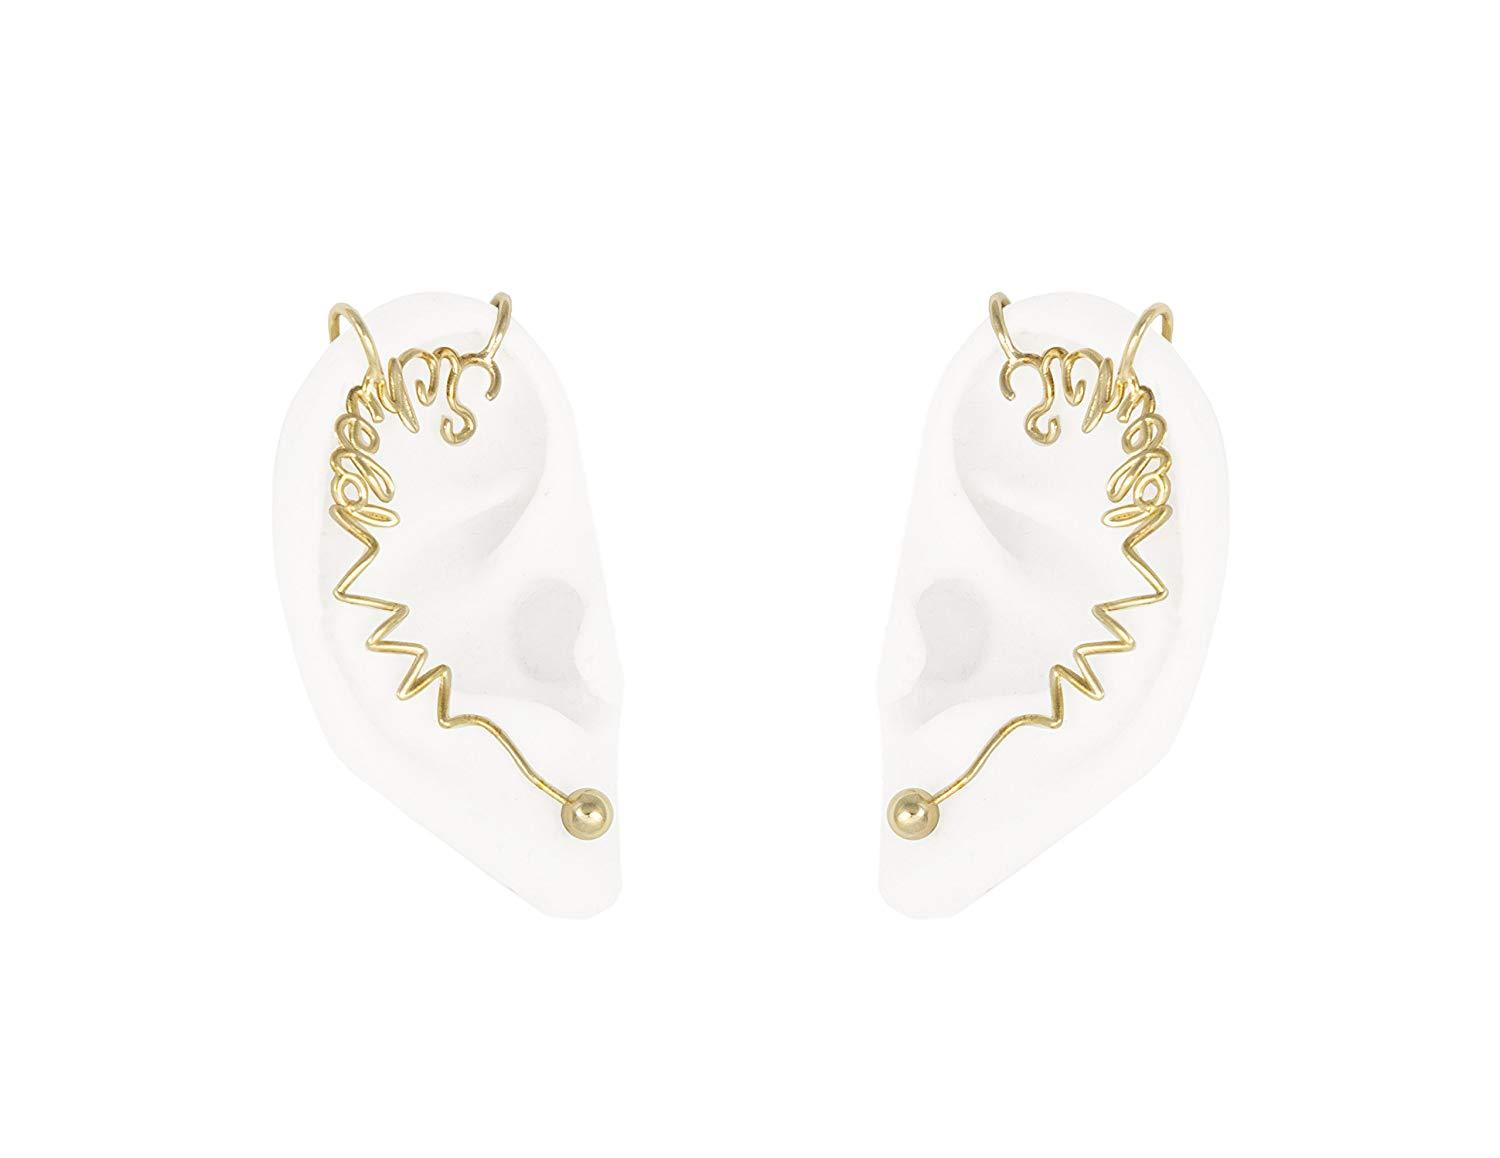 SCHIELD Women's Gold Plated Earcuffs - Stockpoint Apparel Outlet